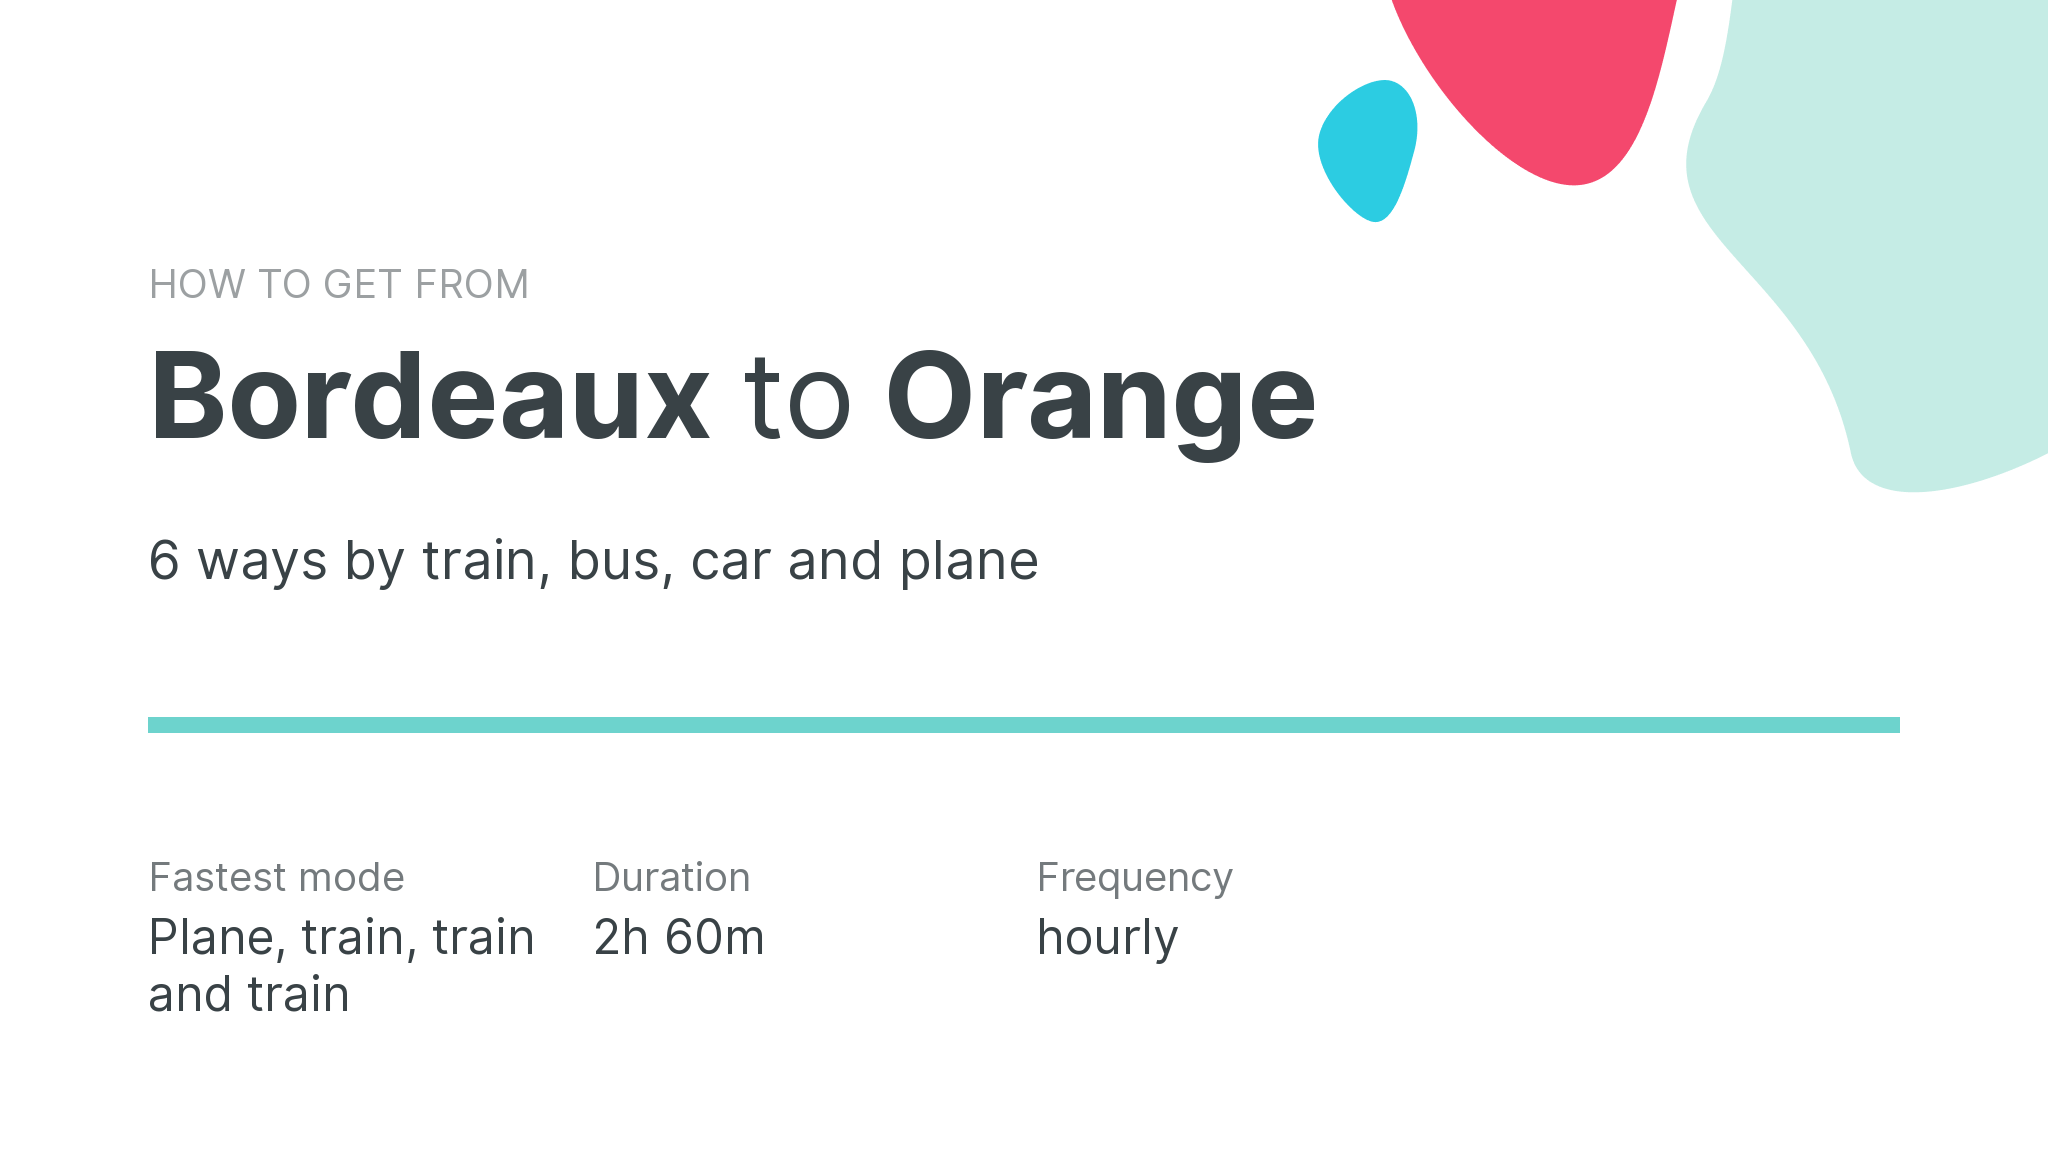 How do I get from Bordeaux to Orange